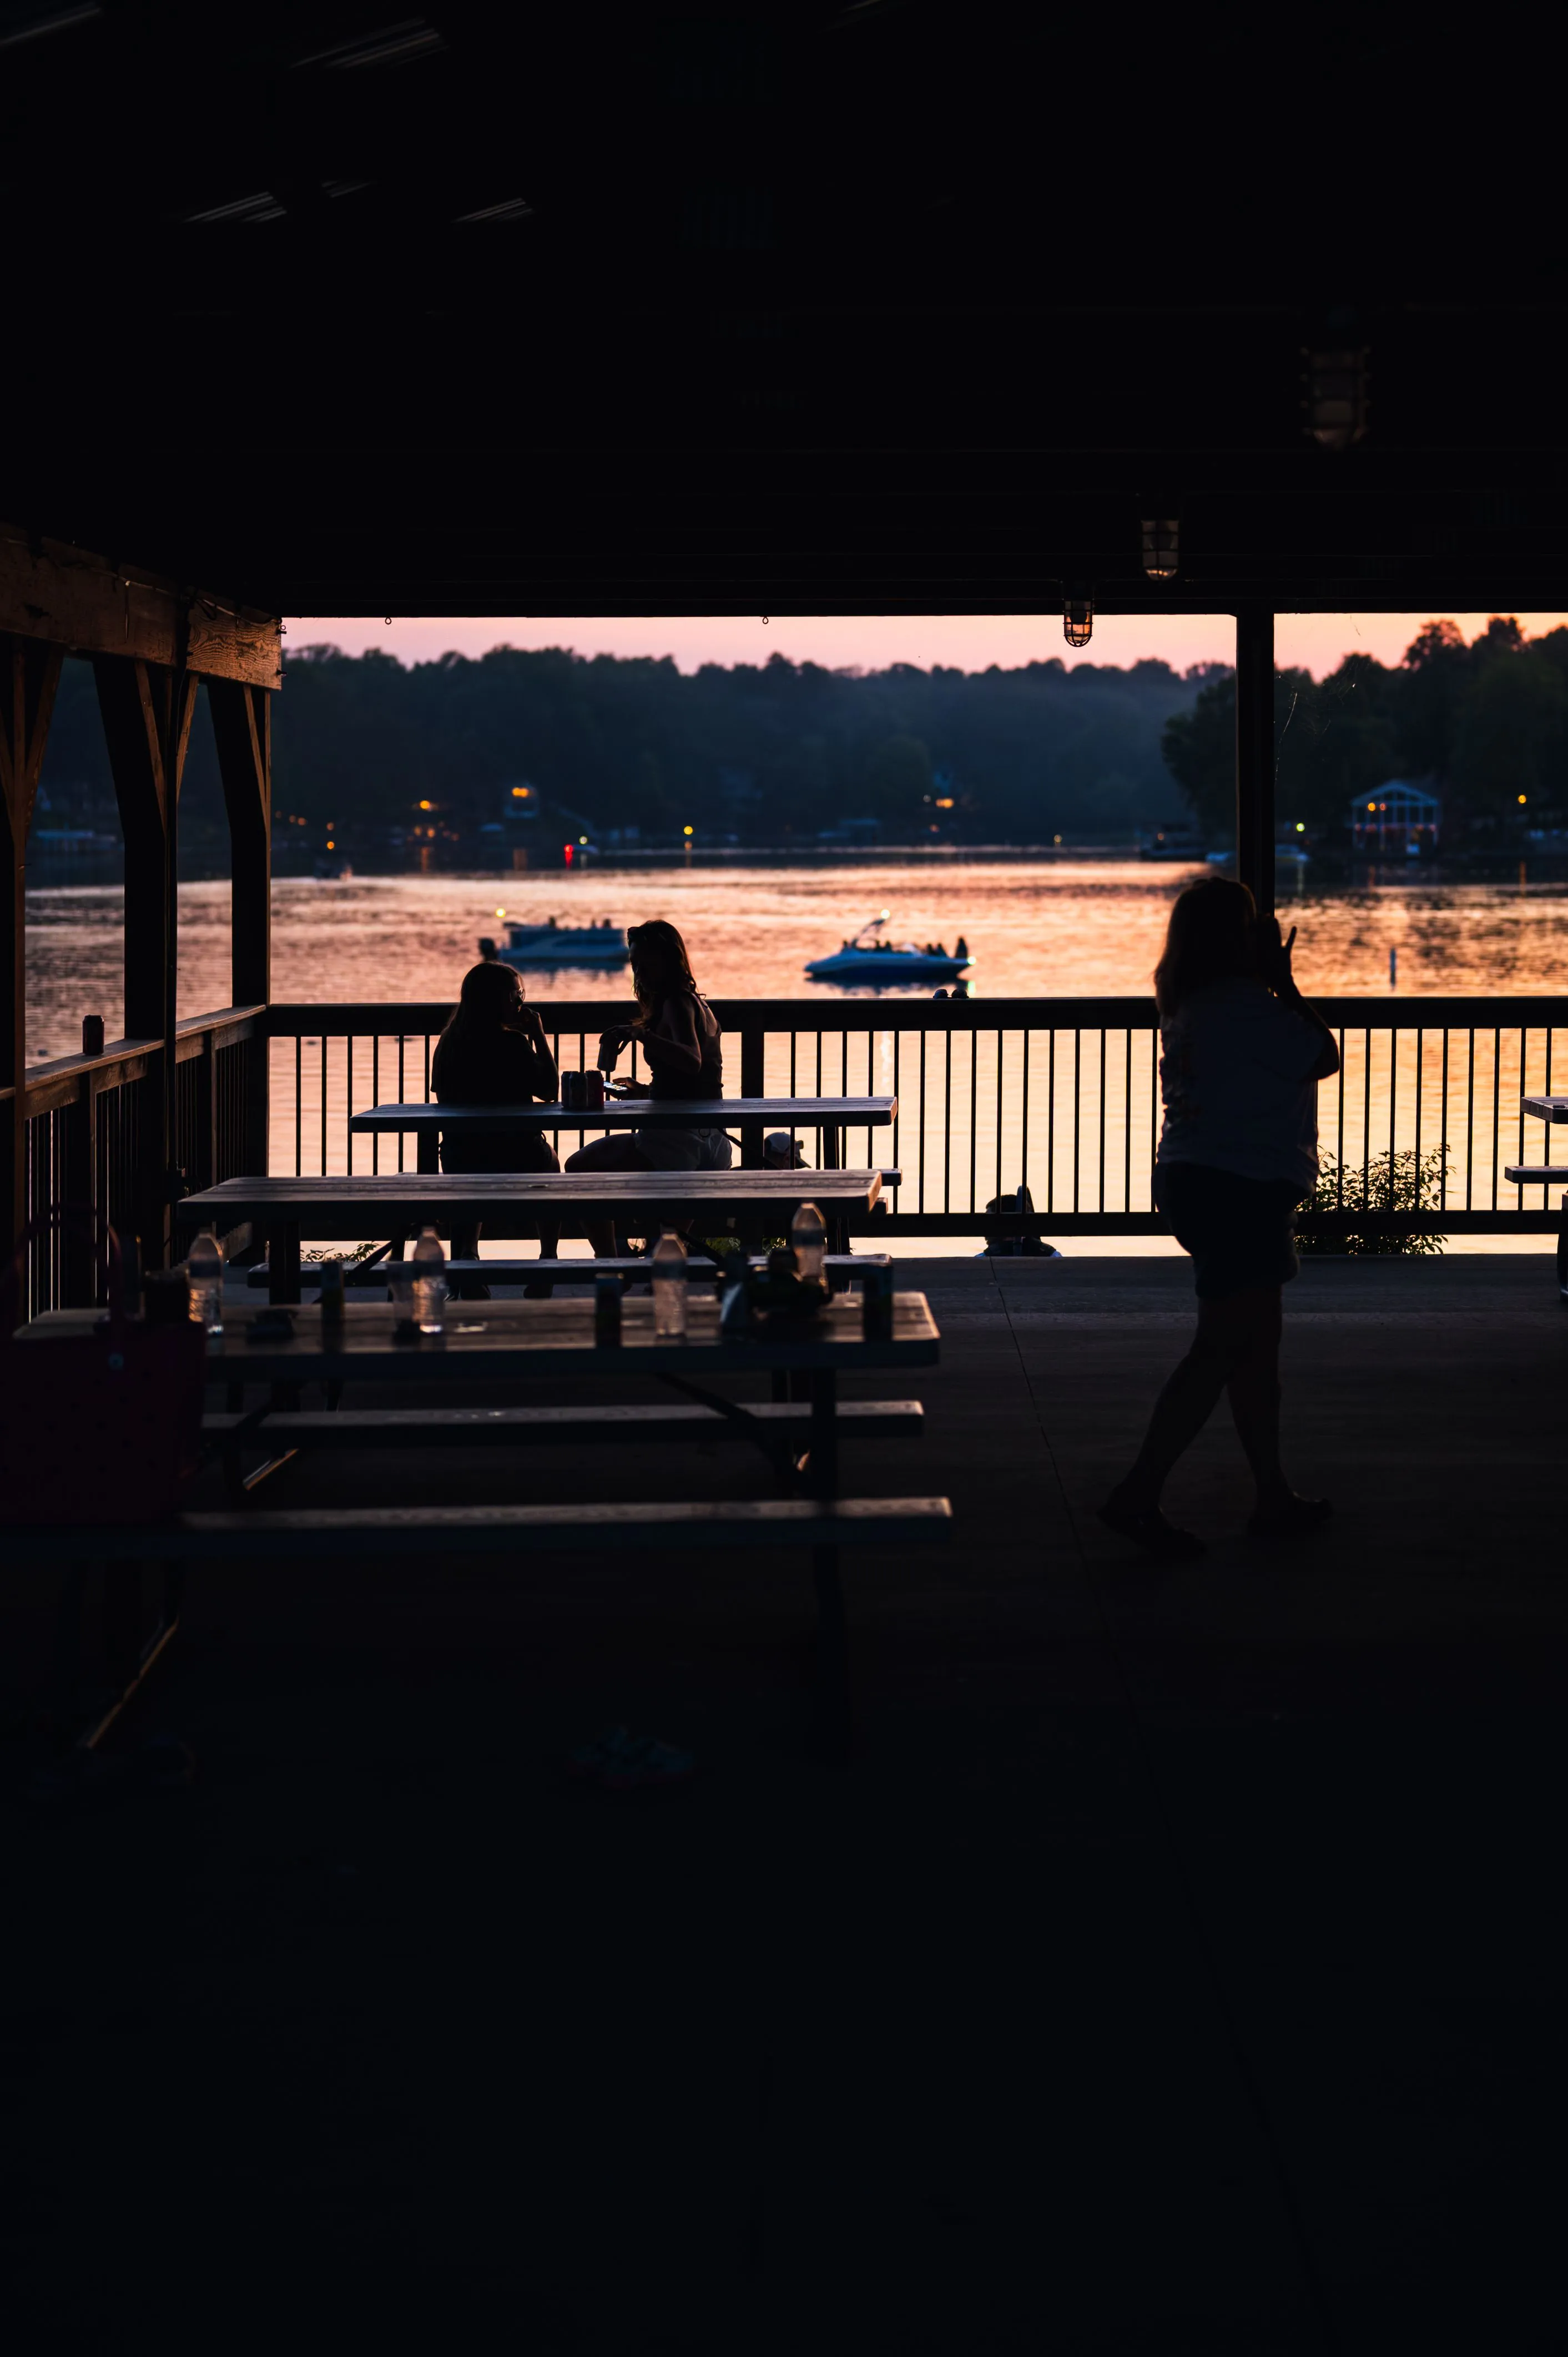 Silhouette of a person standing by a railing under a shelter with a distant sunset over a calm body of water.